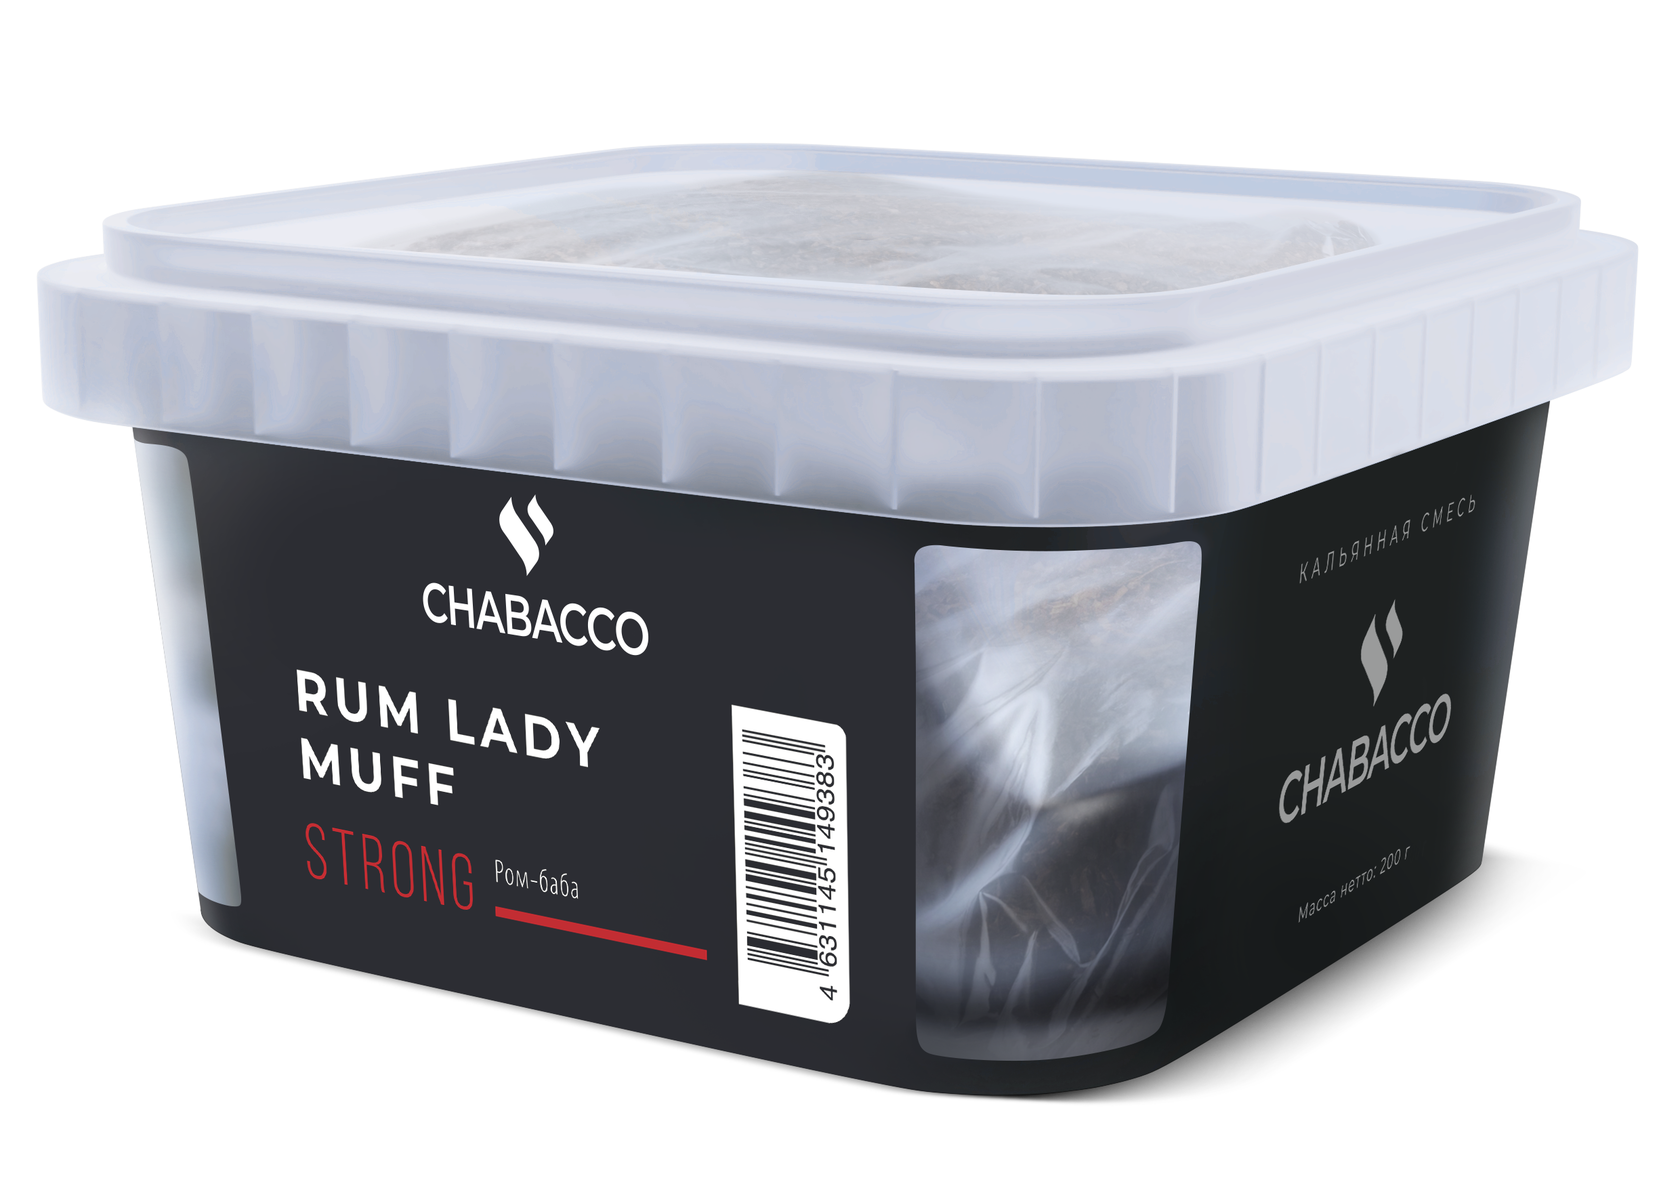 Chabacco - STRONG - RUM LADY MUFF - 200 g